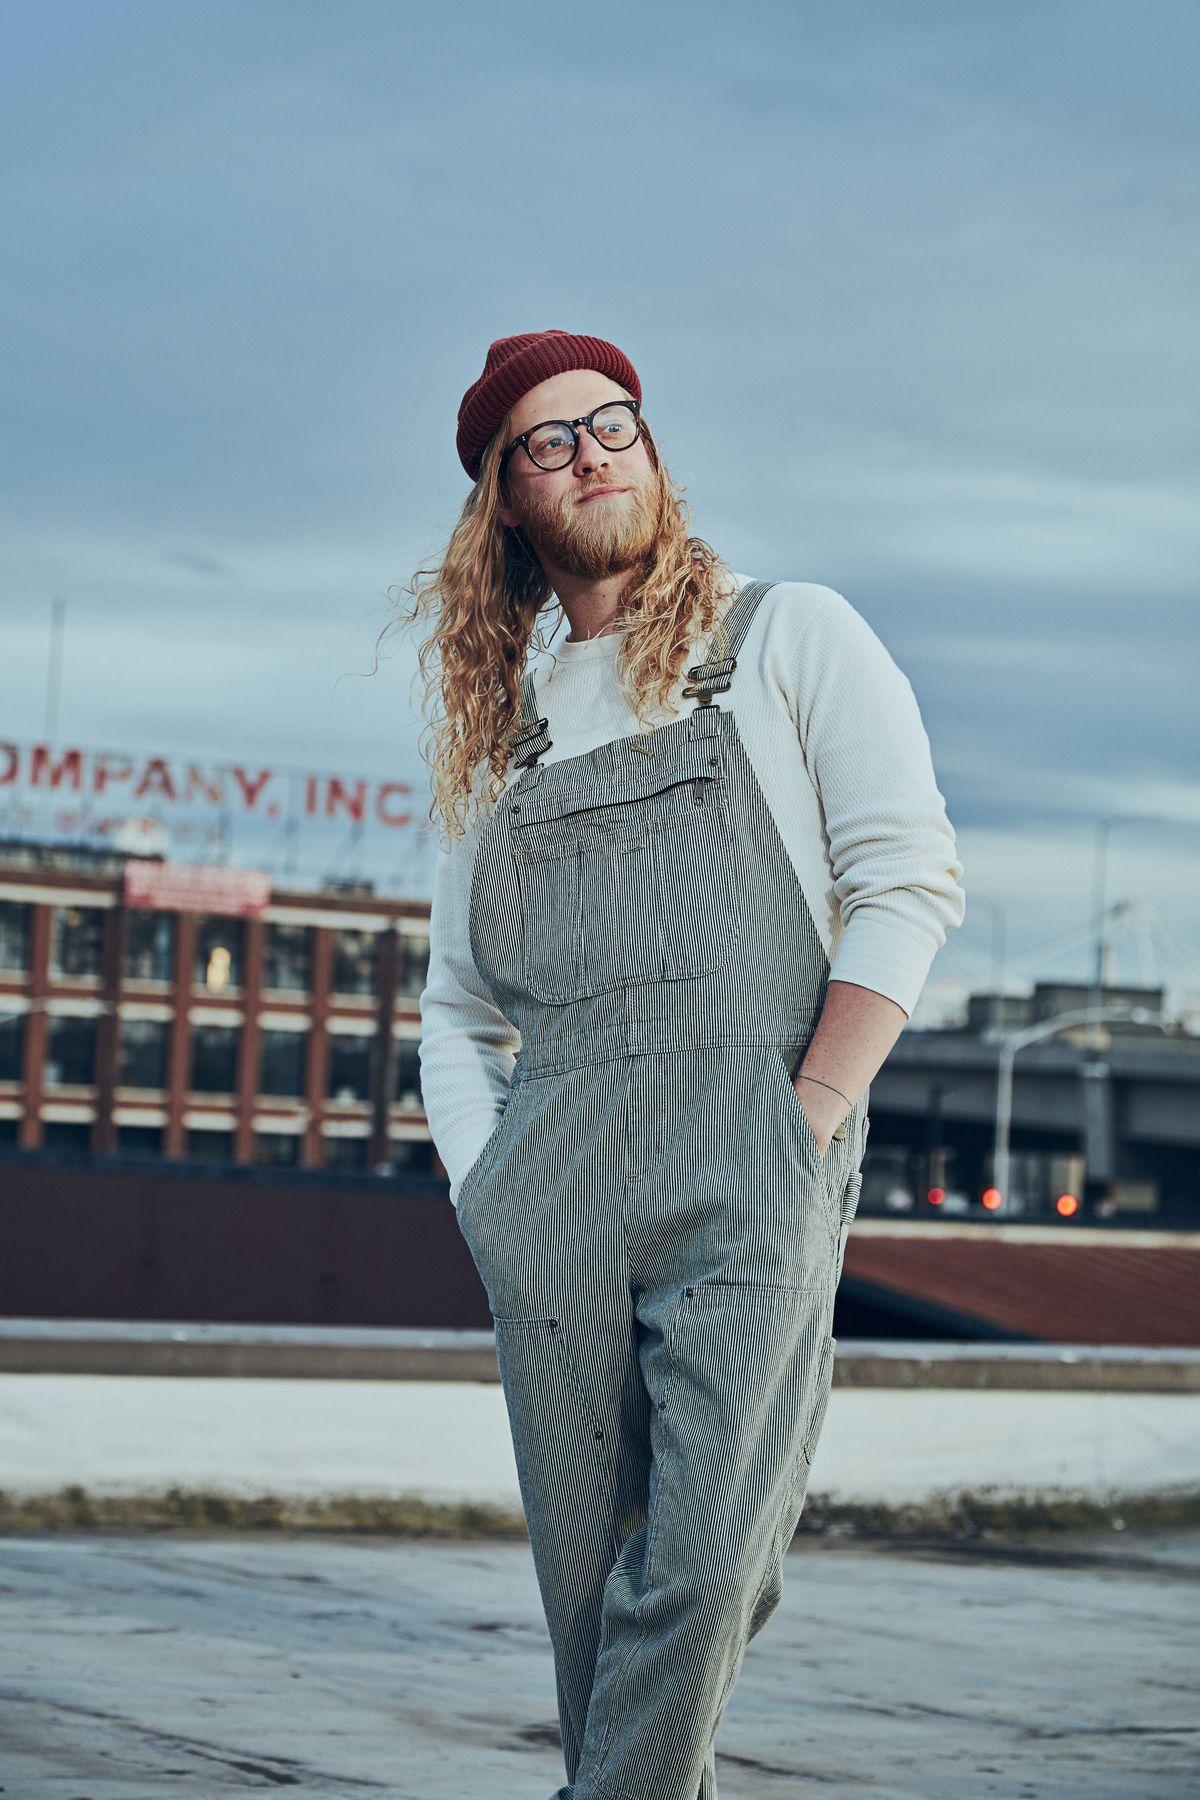 Singer-songwriter and South Hill resident Allen Stone has penned "A Little Bit of Both" for NBC